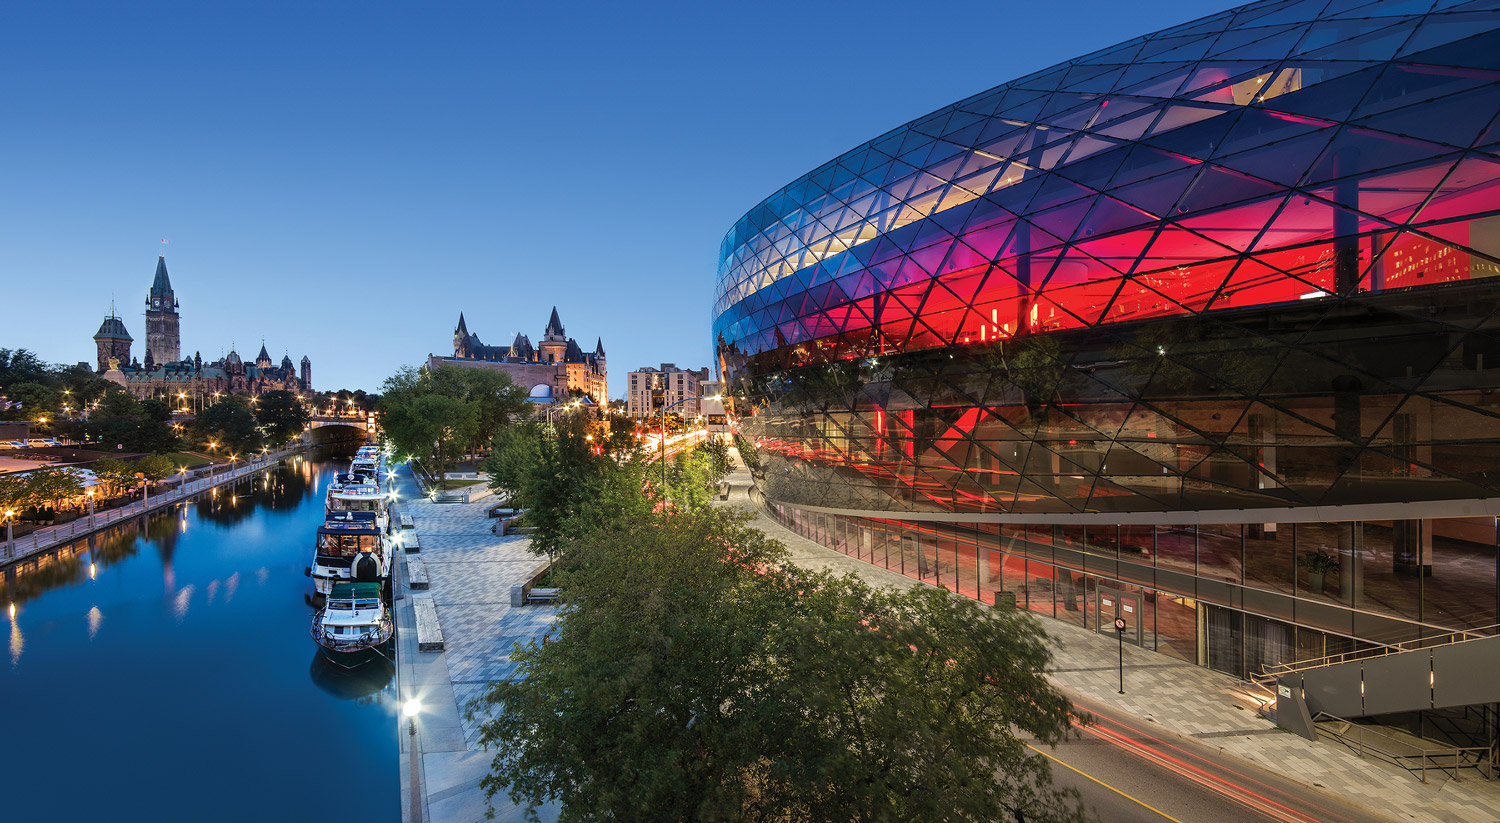 The Shaw Centre overlooks the Rideau Canal at dusk.